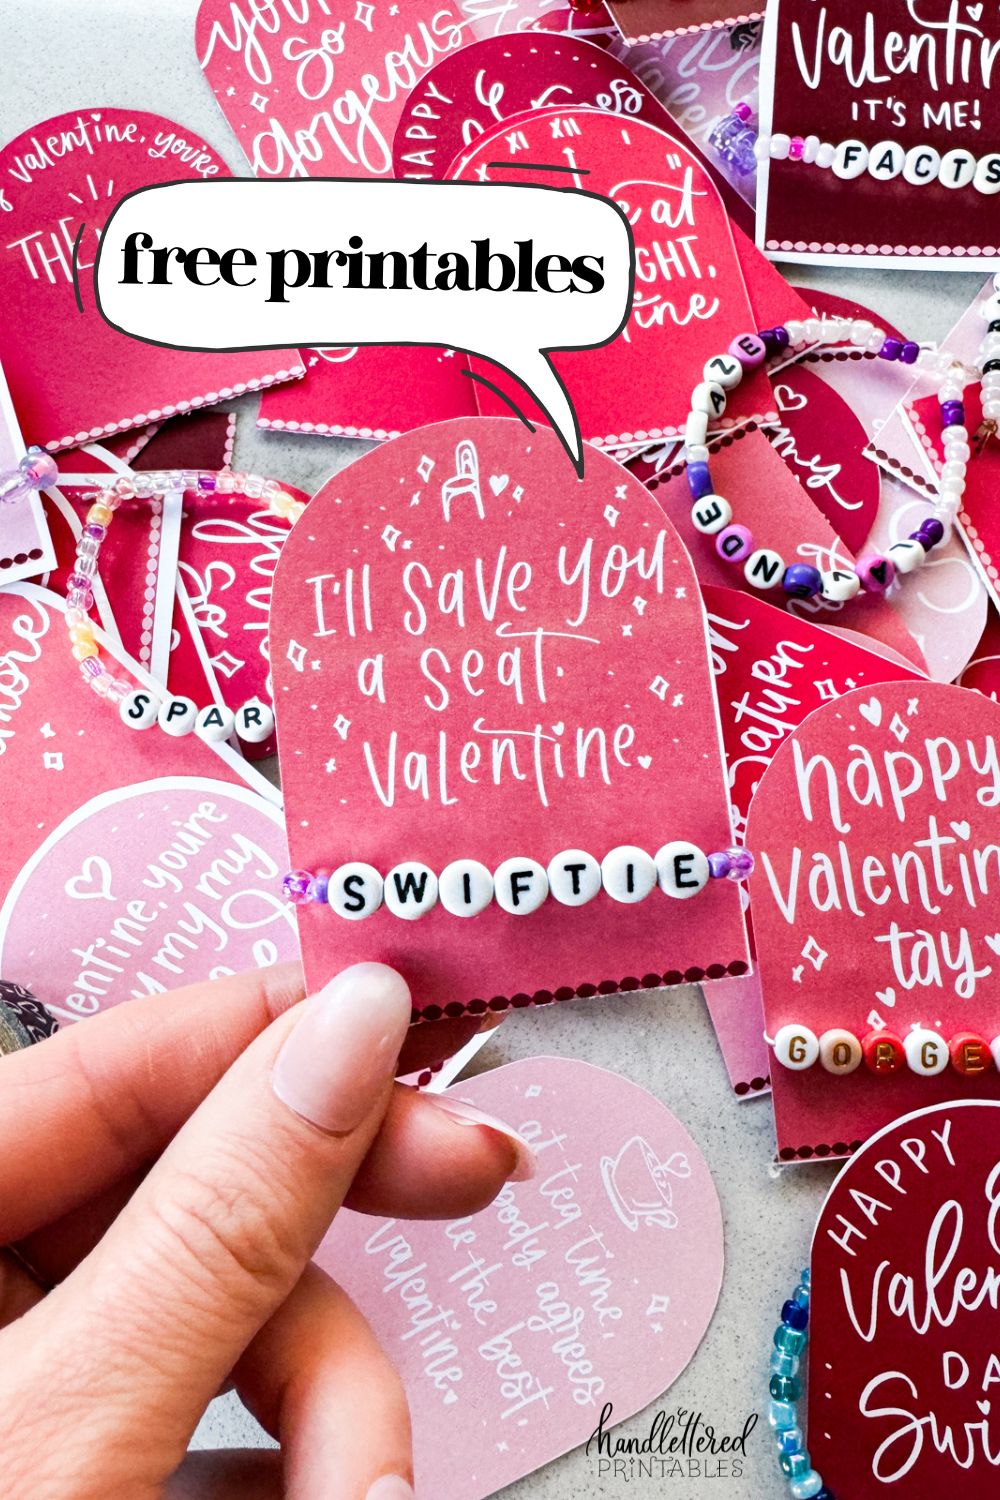 text reads: taylor swift themed valentines day cards printed and cut to size (pink and deep burgundy color with white hand lettered song lyrics) shown on marble countertop with beaded friendship bracelets. held valentine reads: i'll save you a seat, valentine with a 'swiftie' bracelet.